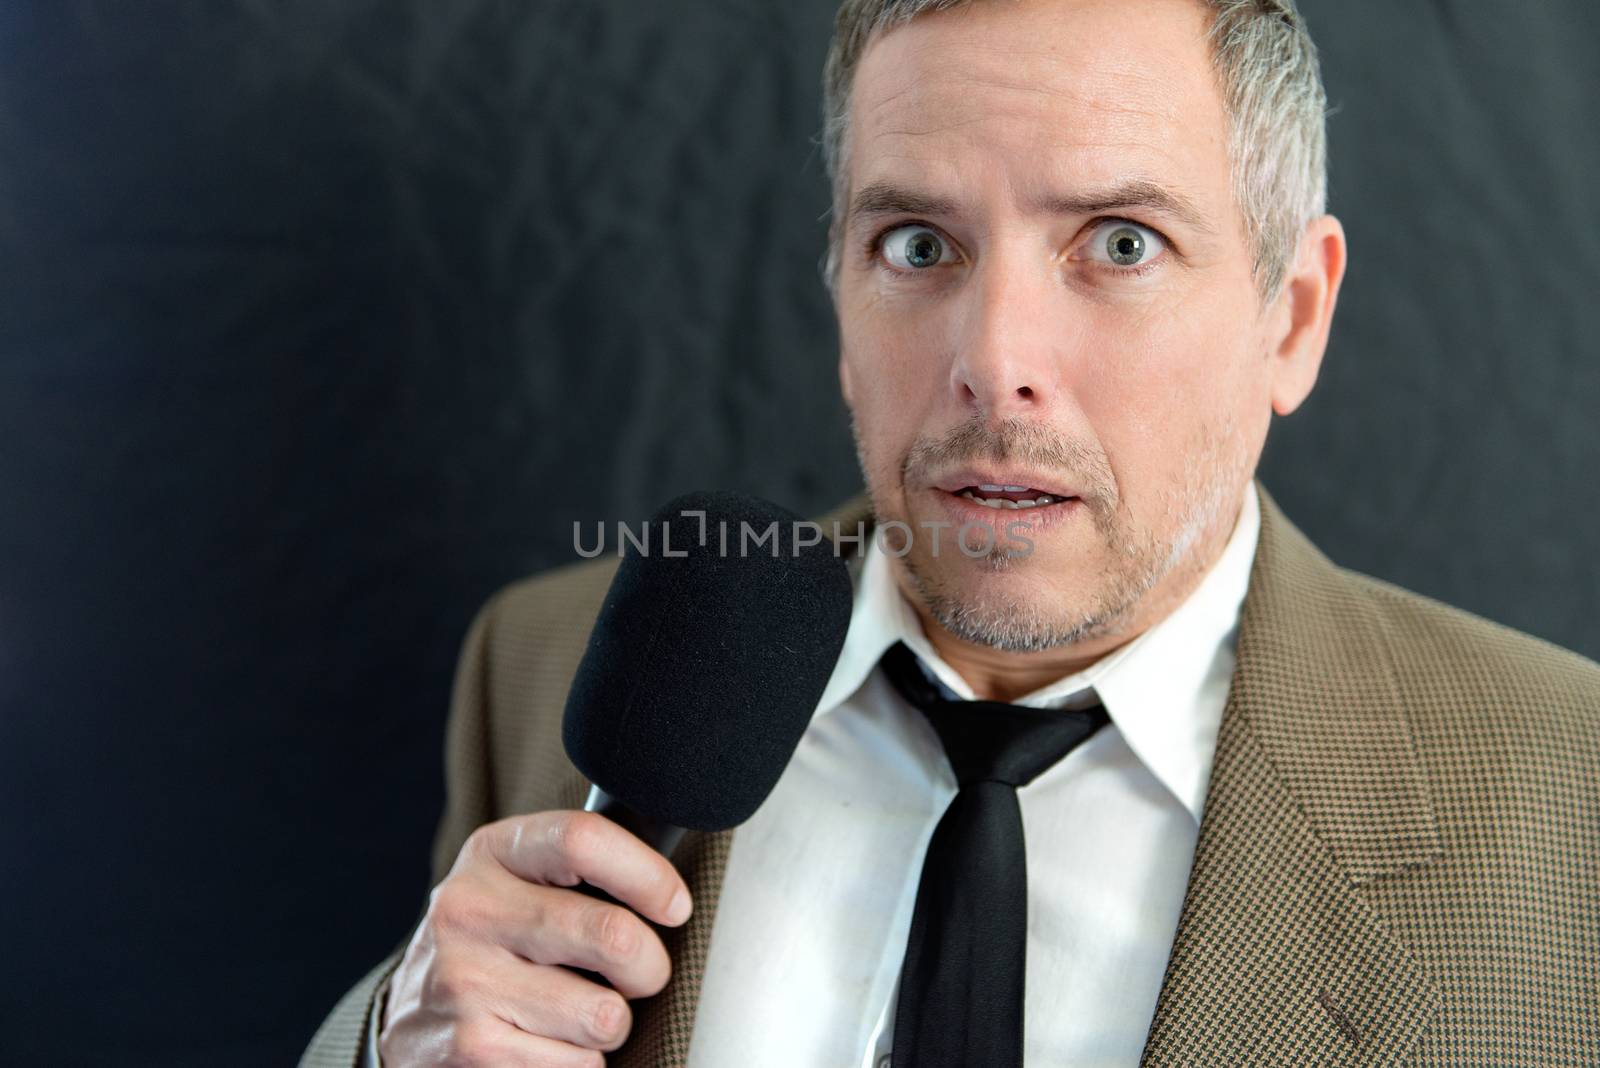 Close-up of an anxious man speaking into microphone.